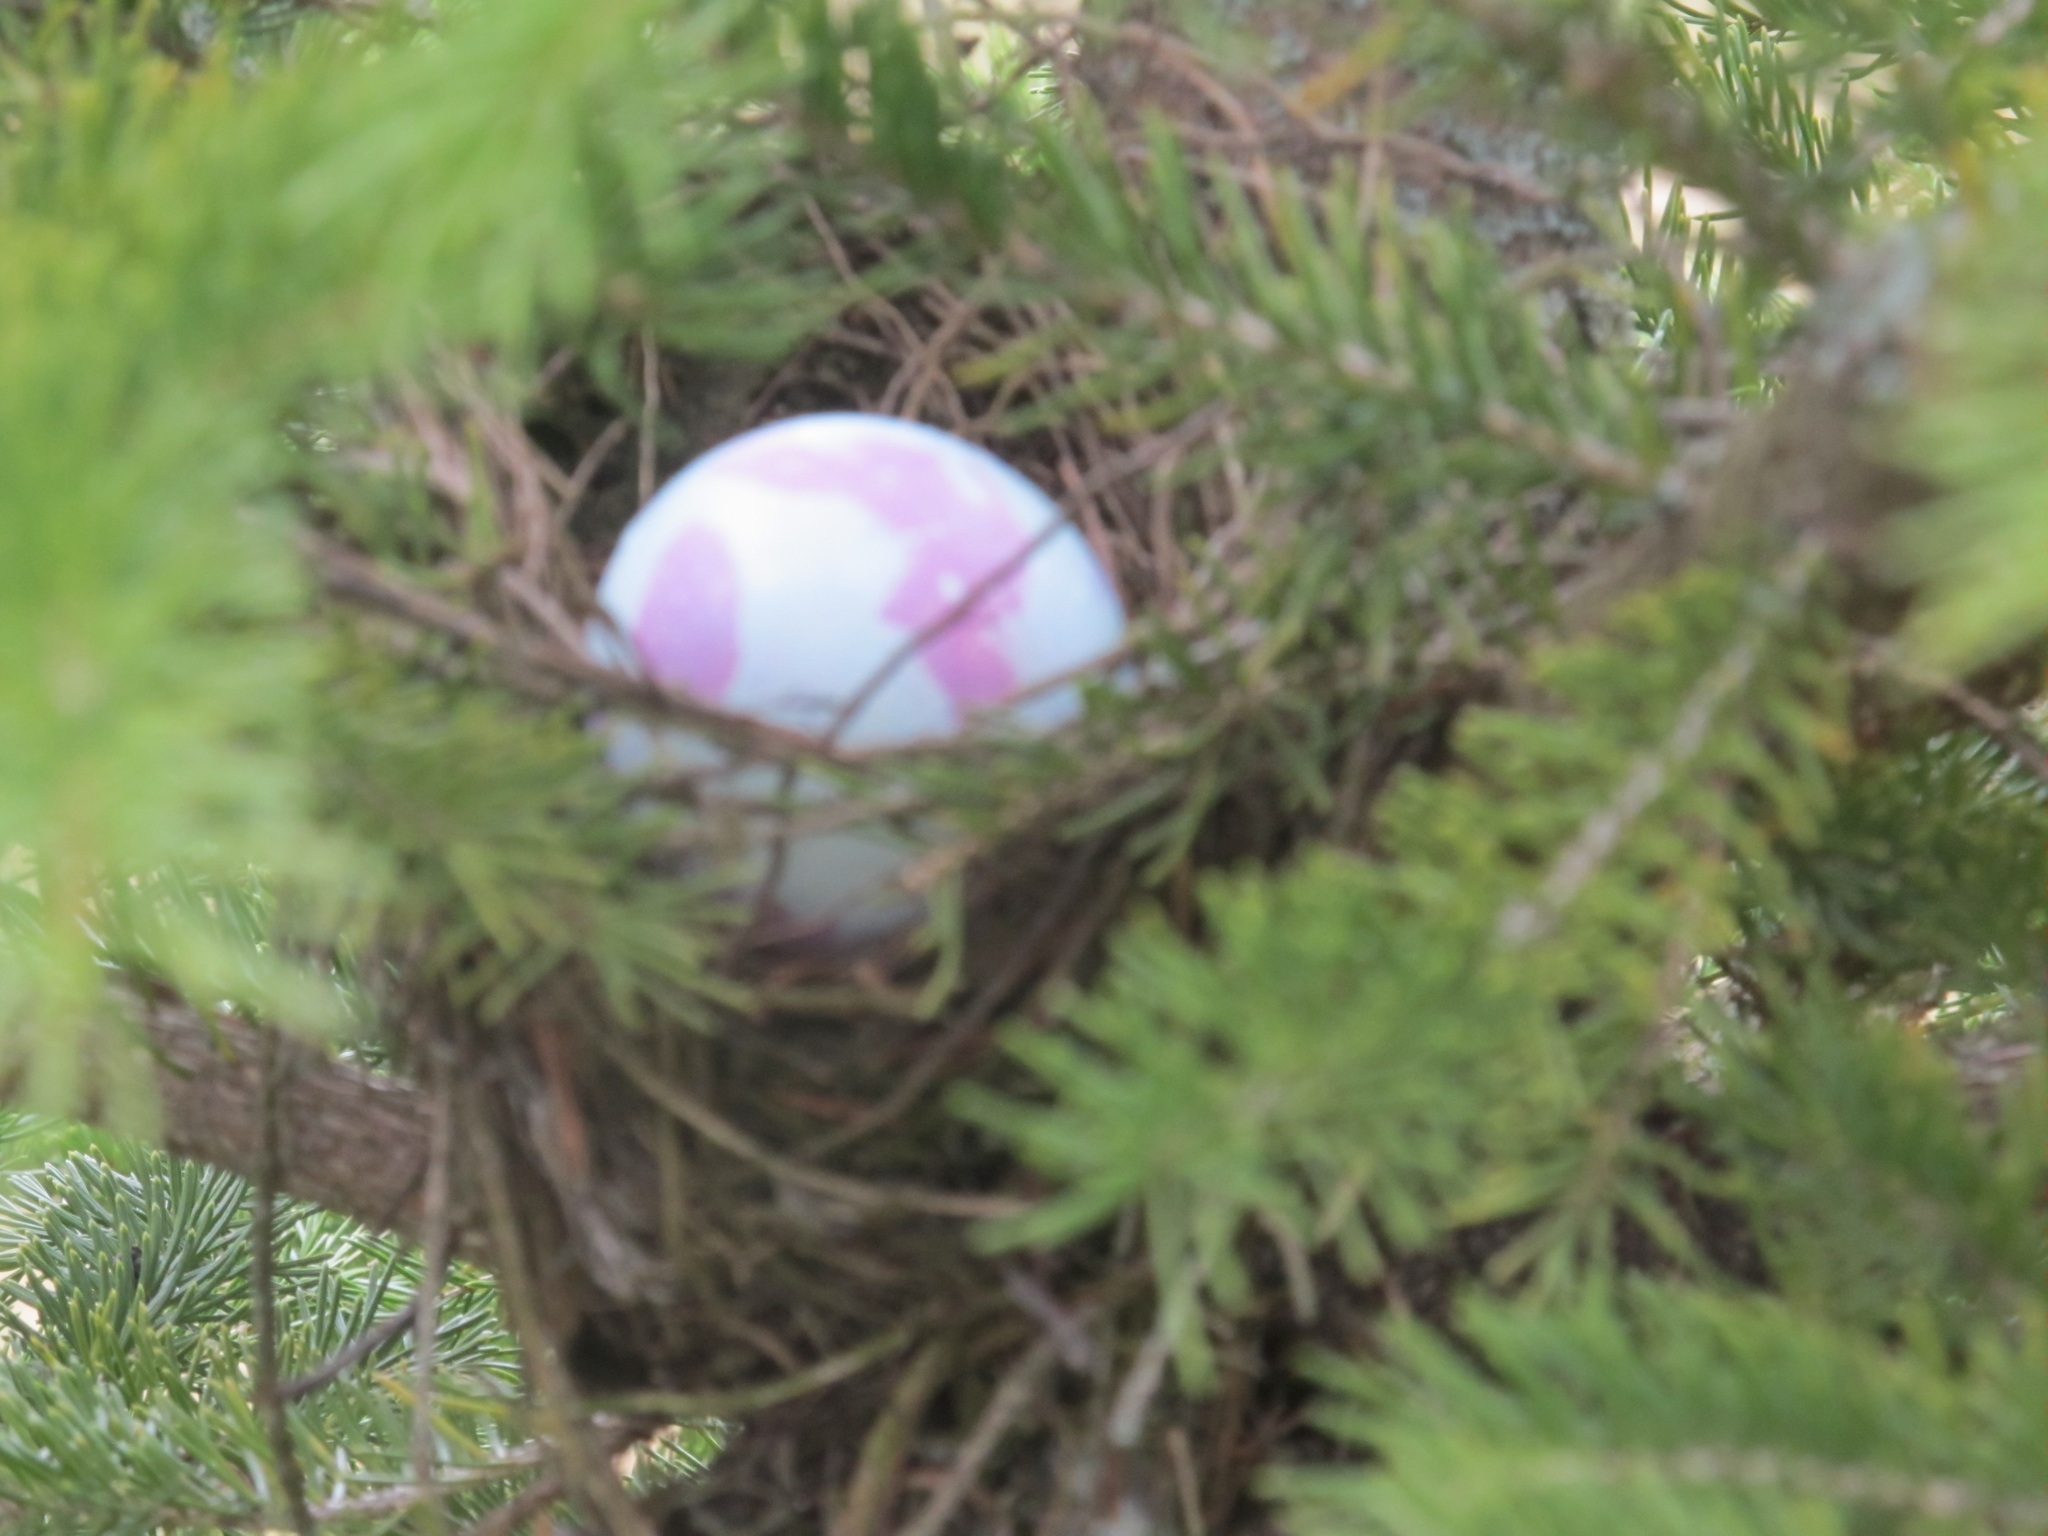 From traditional Easter egg hunt 2012.  Found some real birds nest to hide eggs in.  Kids got a real kick out of it!